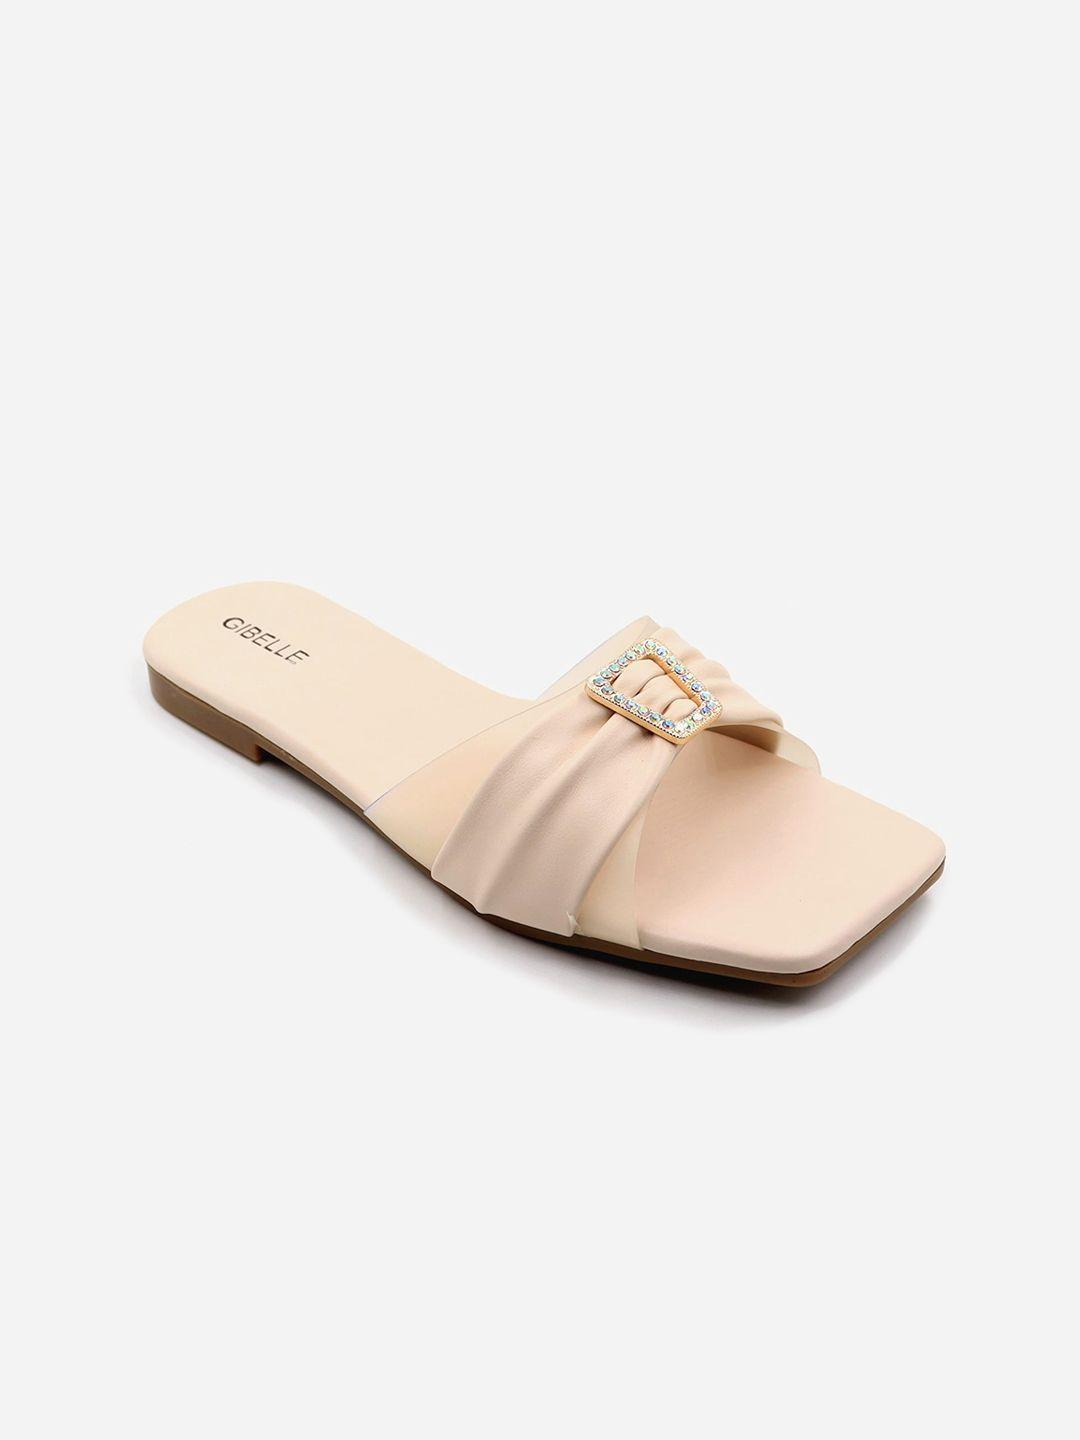 gibelle women open toe flats with bows